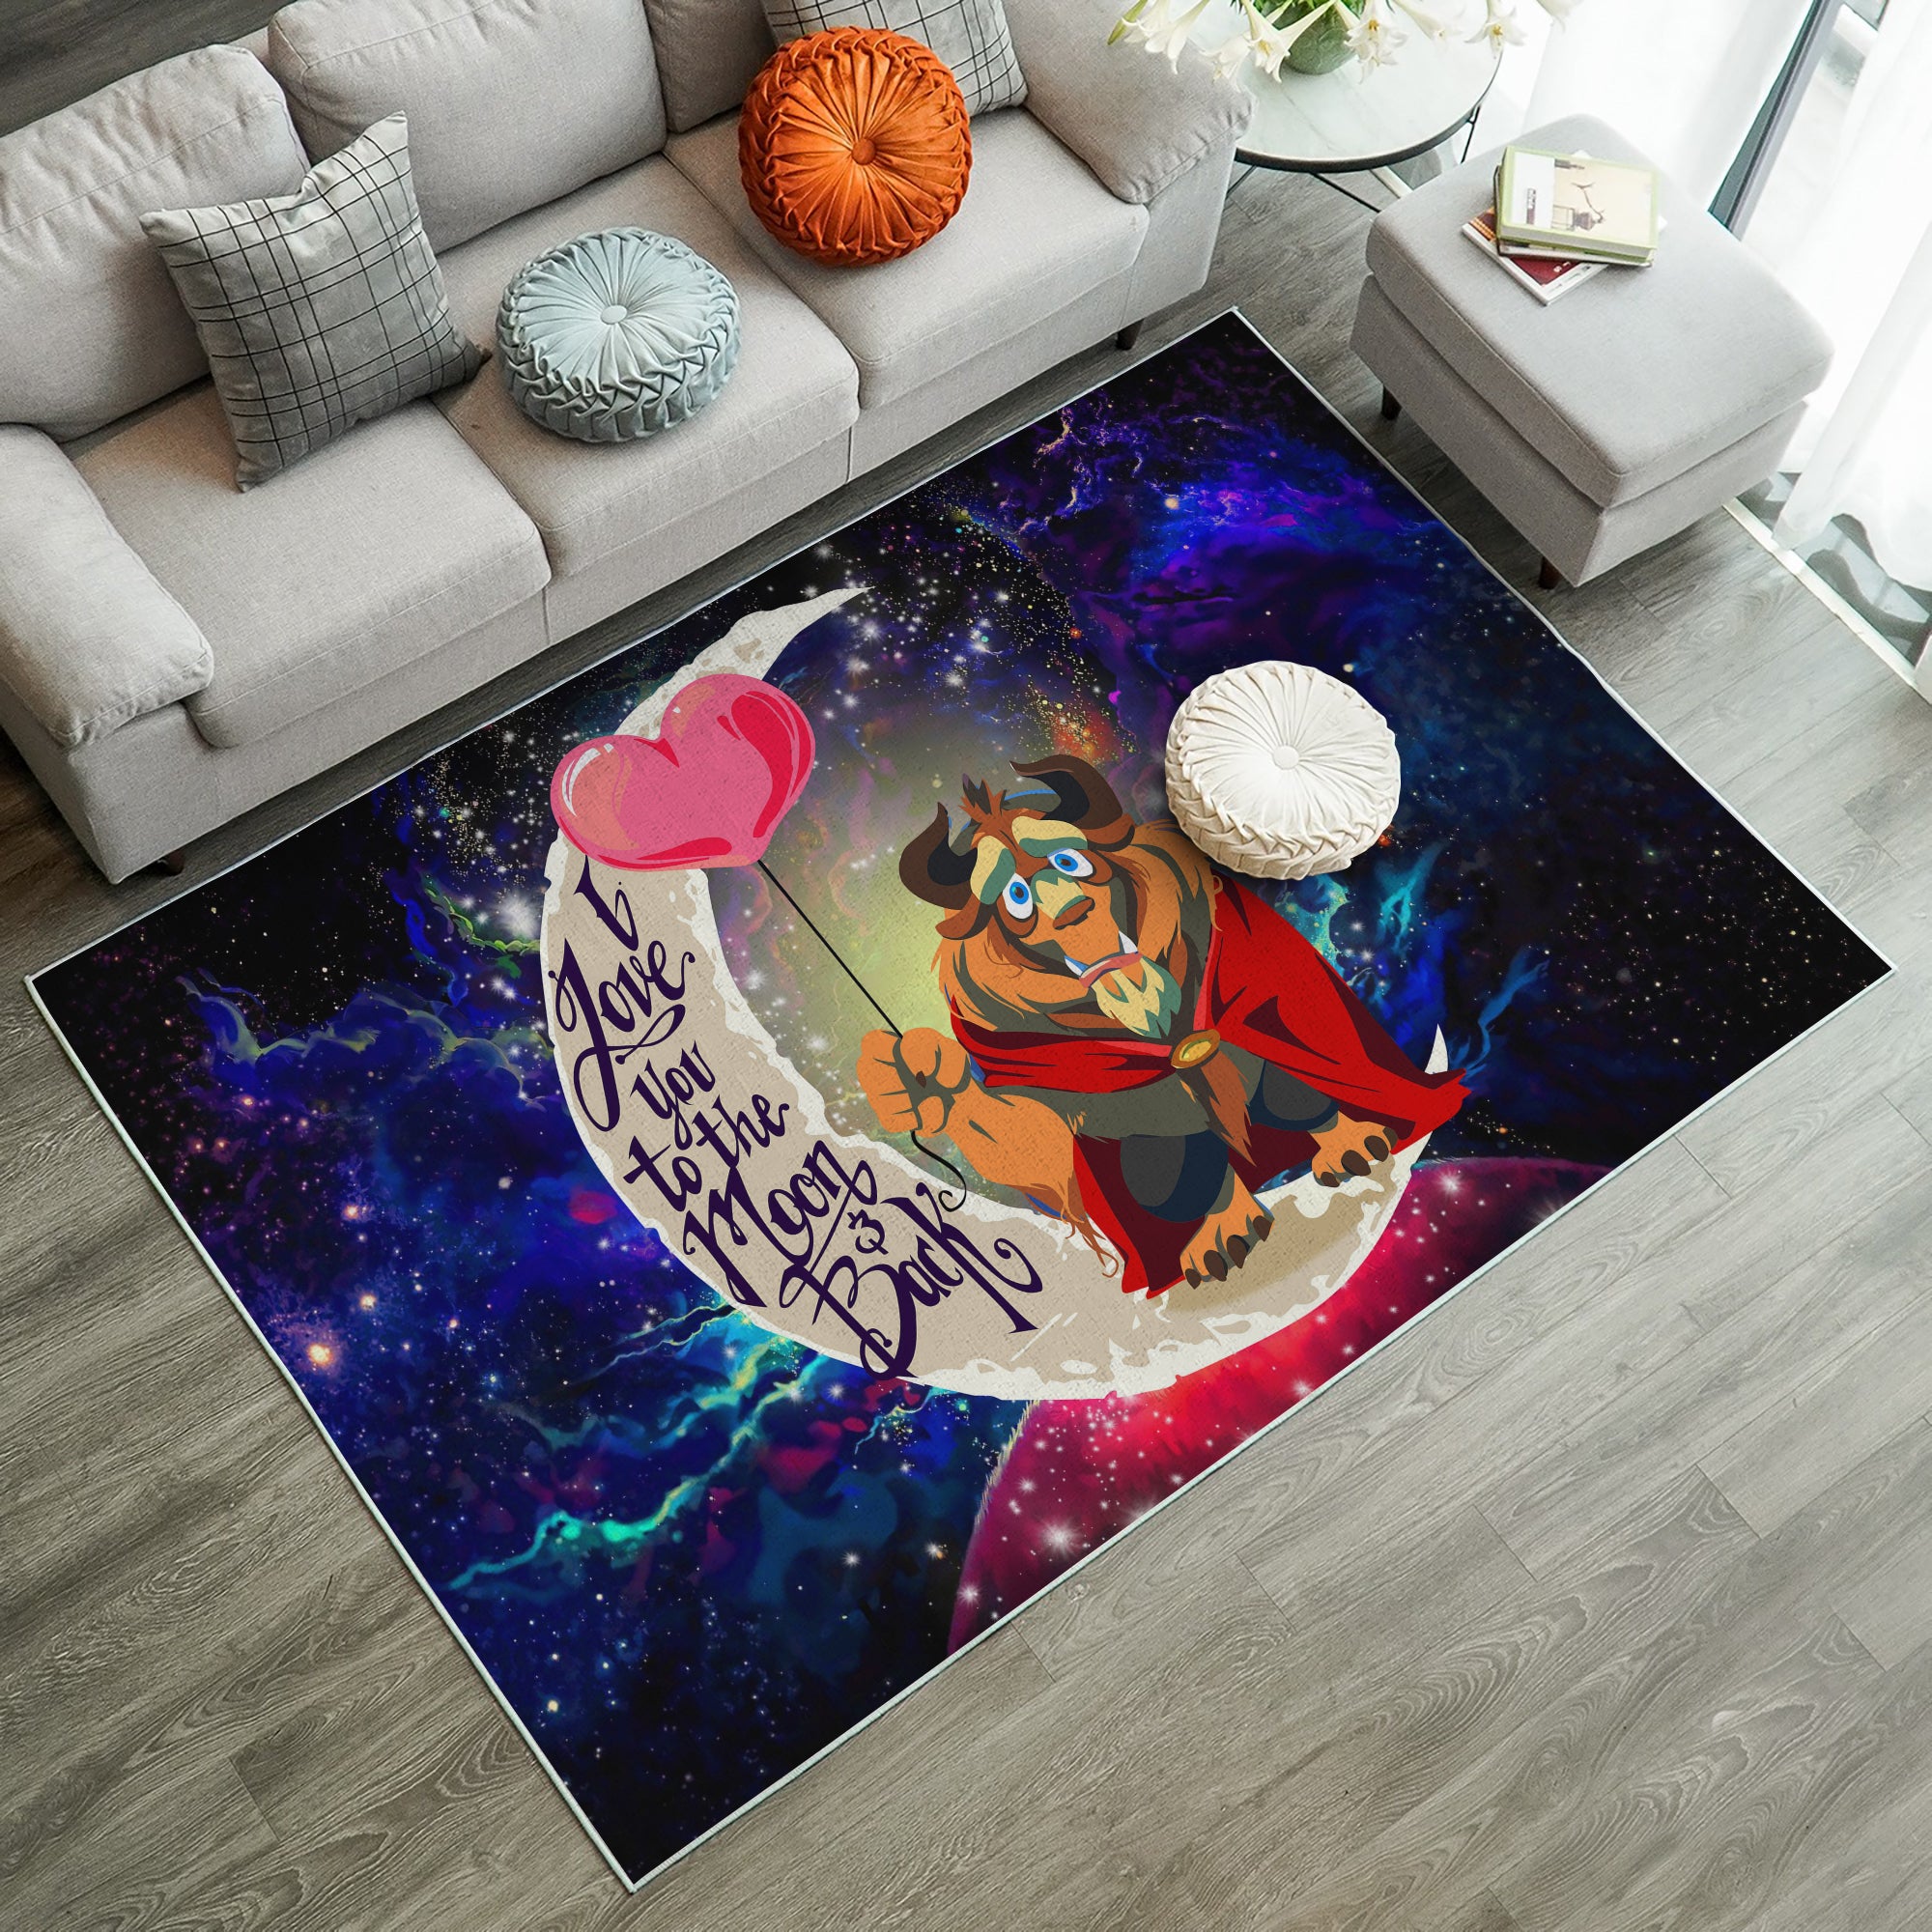 Beauty And The Beast Love You To The Moon Galaxy Carpet Rug Home Room Decor